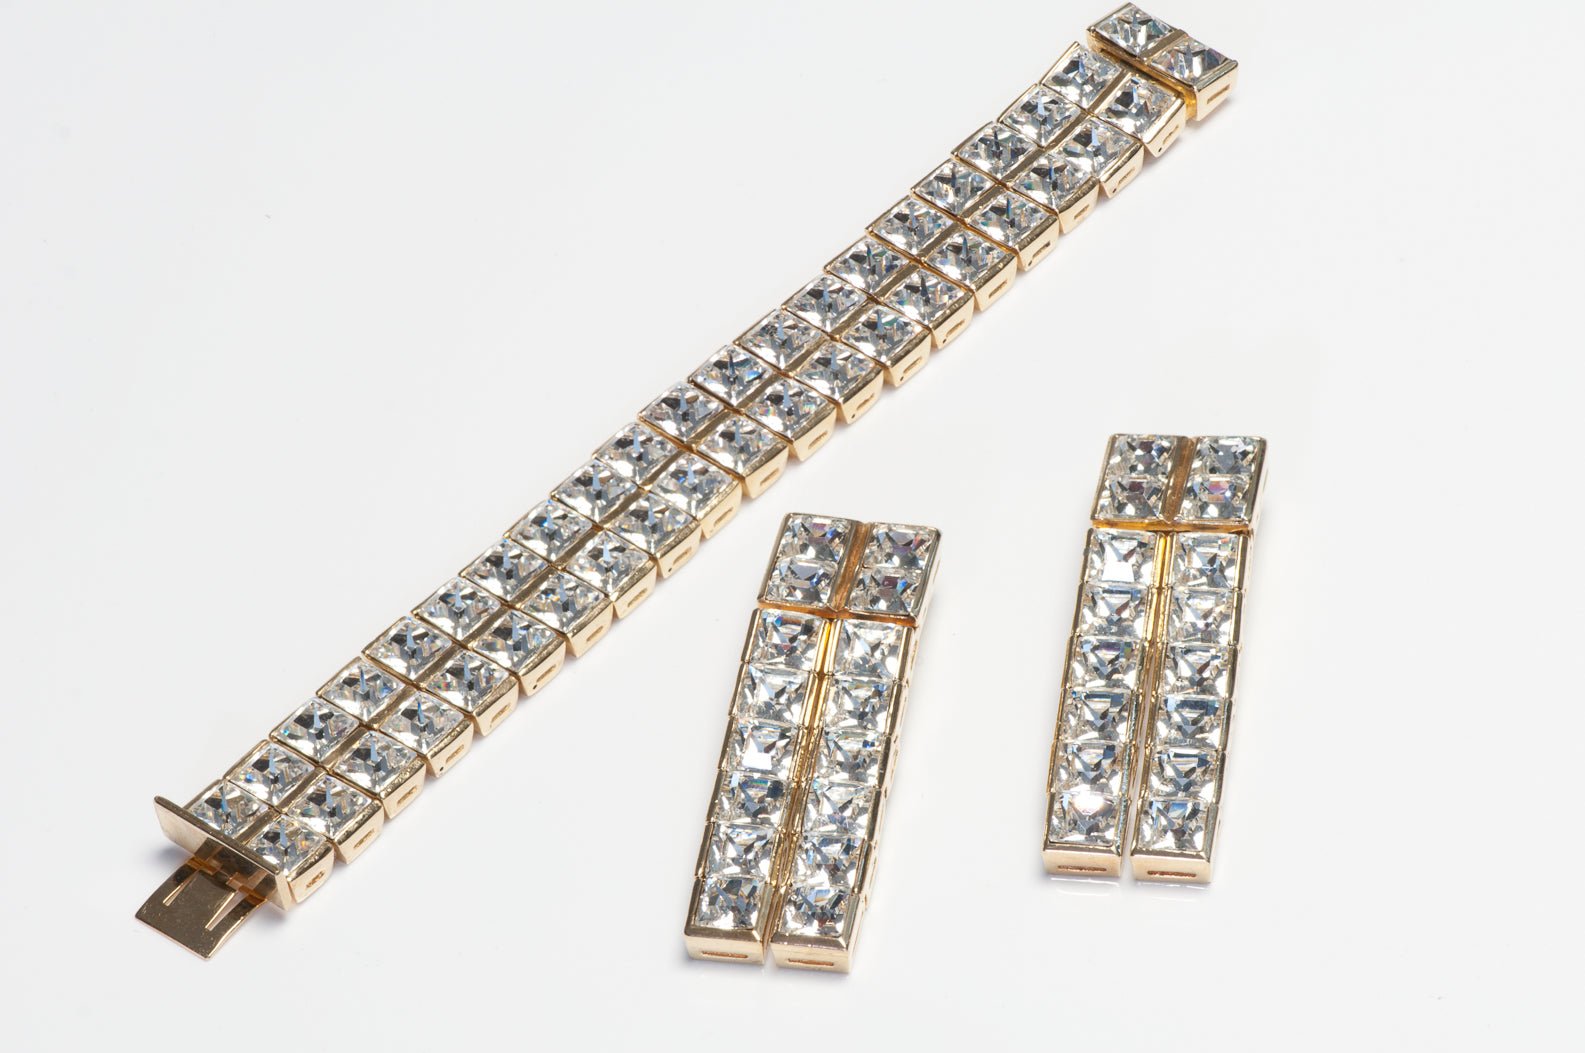 Christian Dior 1980’s by Gianfranco Ferré Crystal Necklace Earrings Bracelet Set - DSF Antique Jewelry